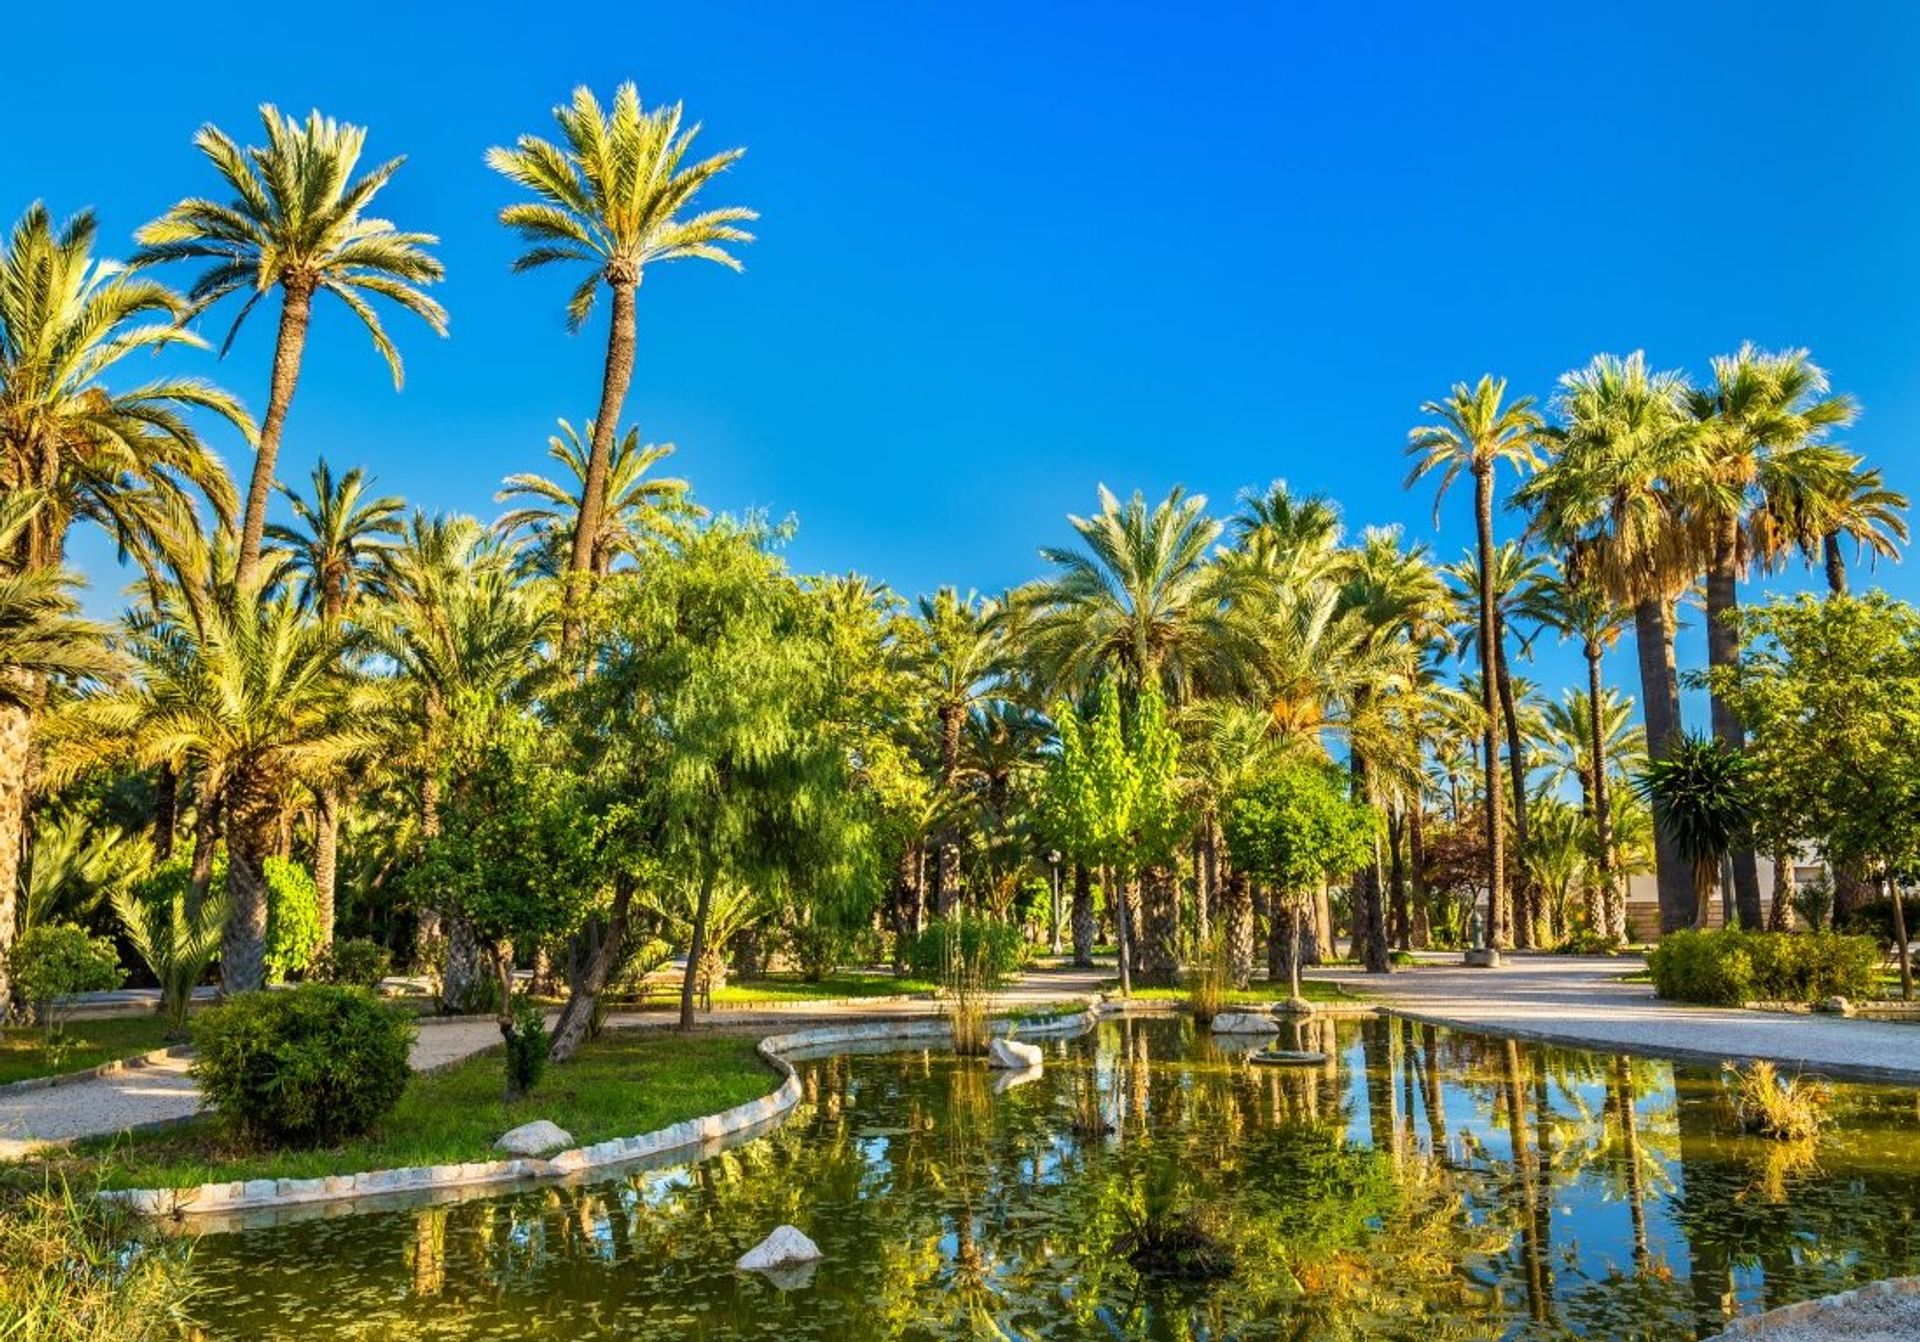 The Palmeral of Elche, just a 30 minute drive from Rojales, is a UNESCO World Heritage Site